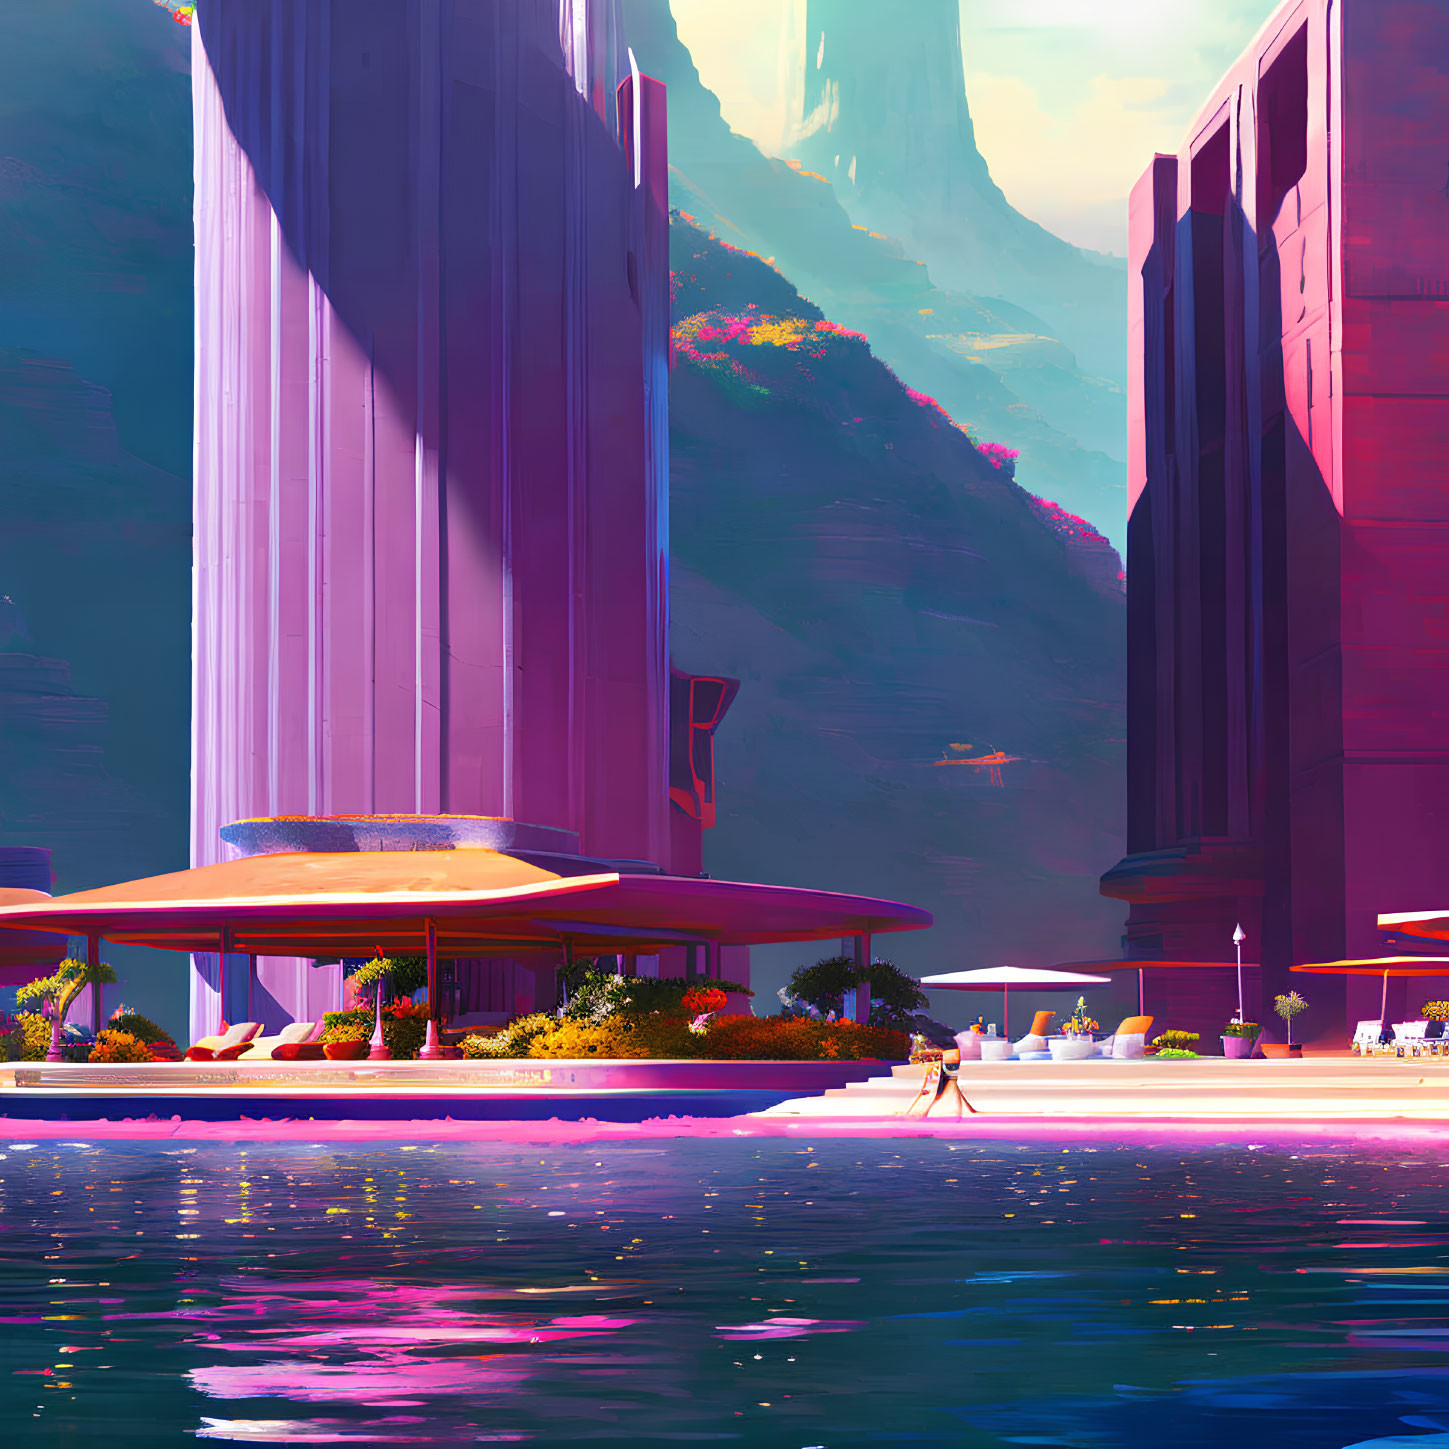 Futuristic cityscape with reflective water and hazy mountains